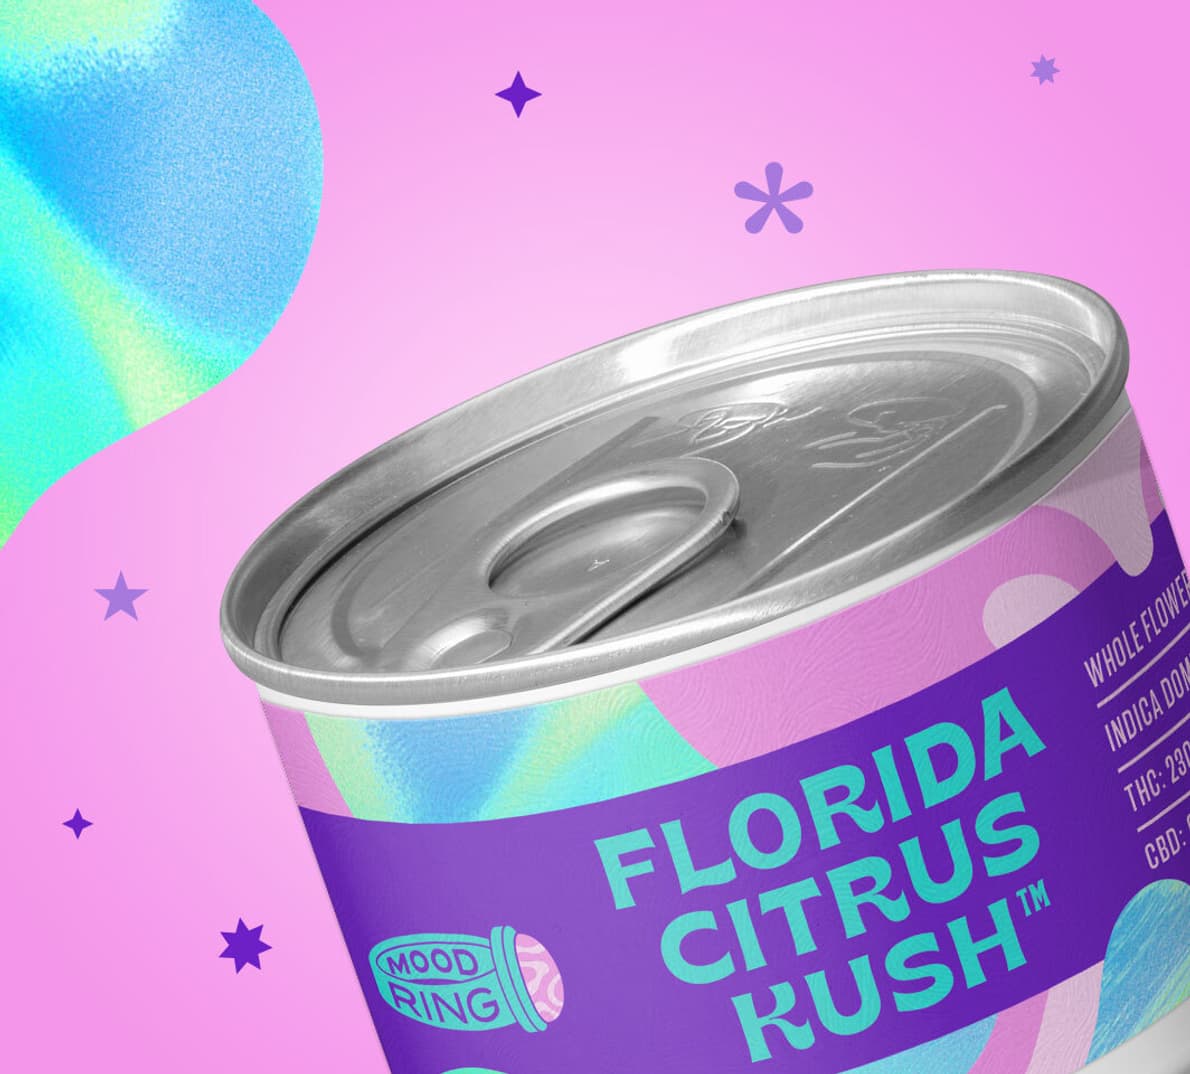 A close-up of a 'Flordia Citrus Kush Whole Flower' tuna can on a pink background.